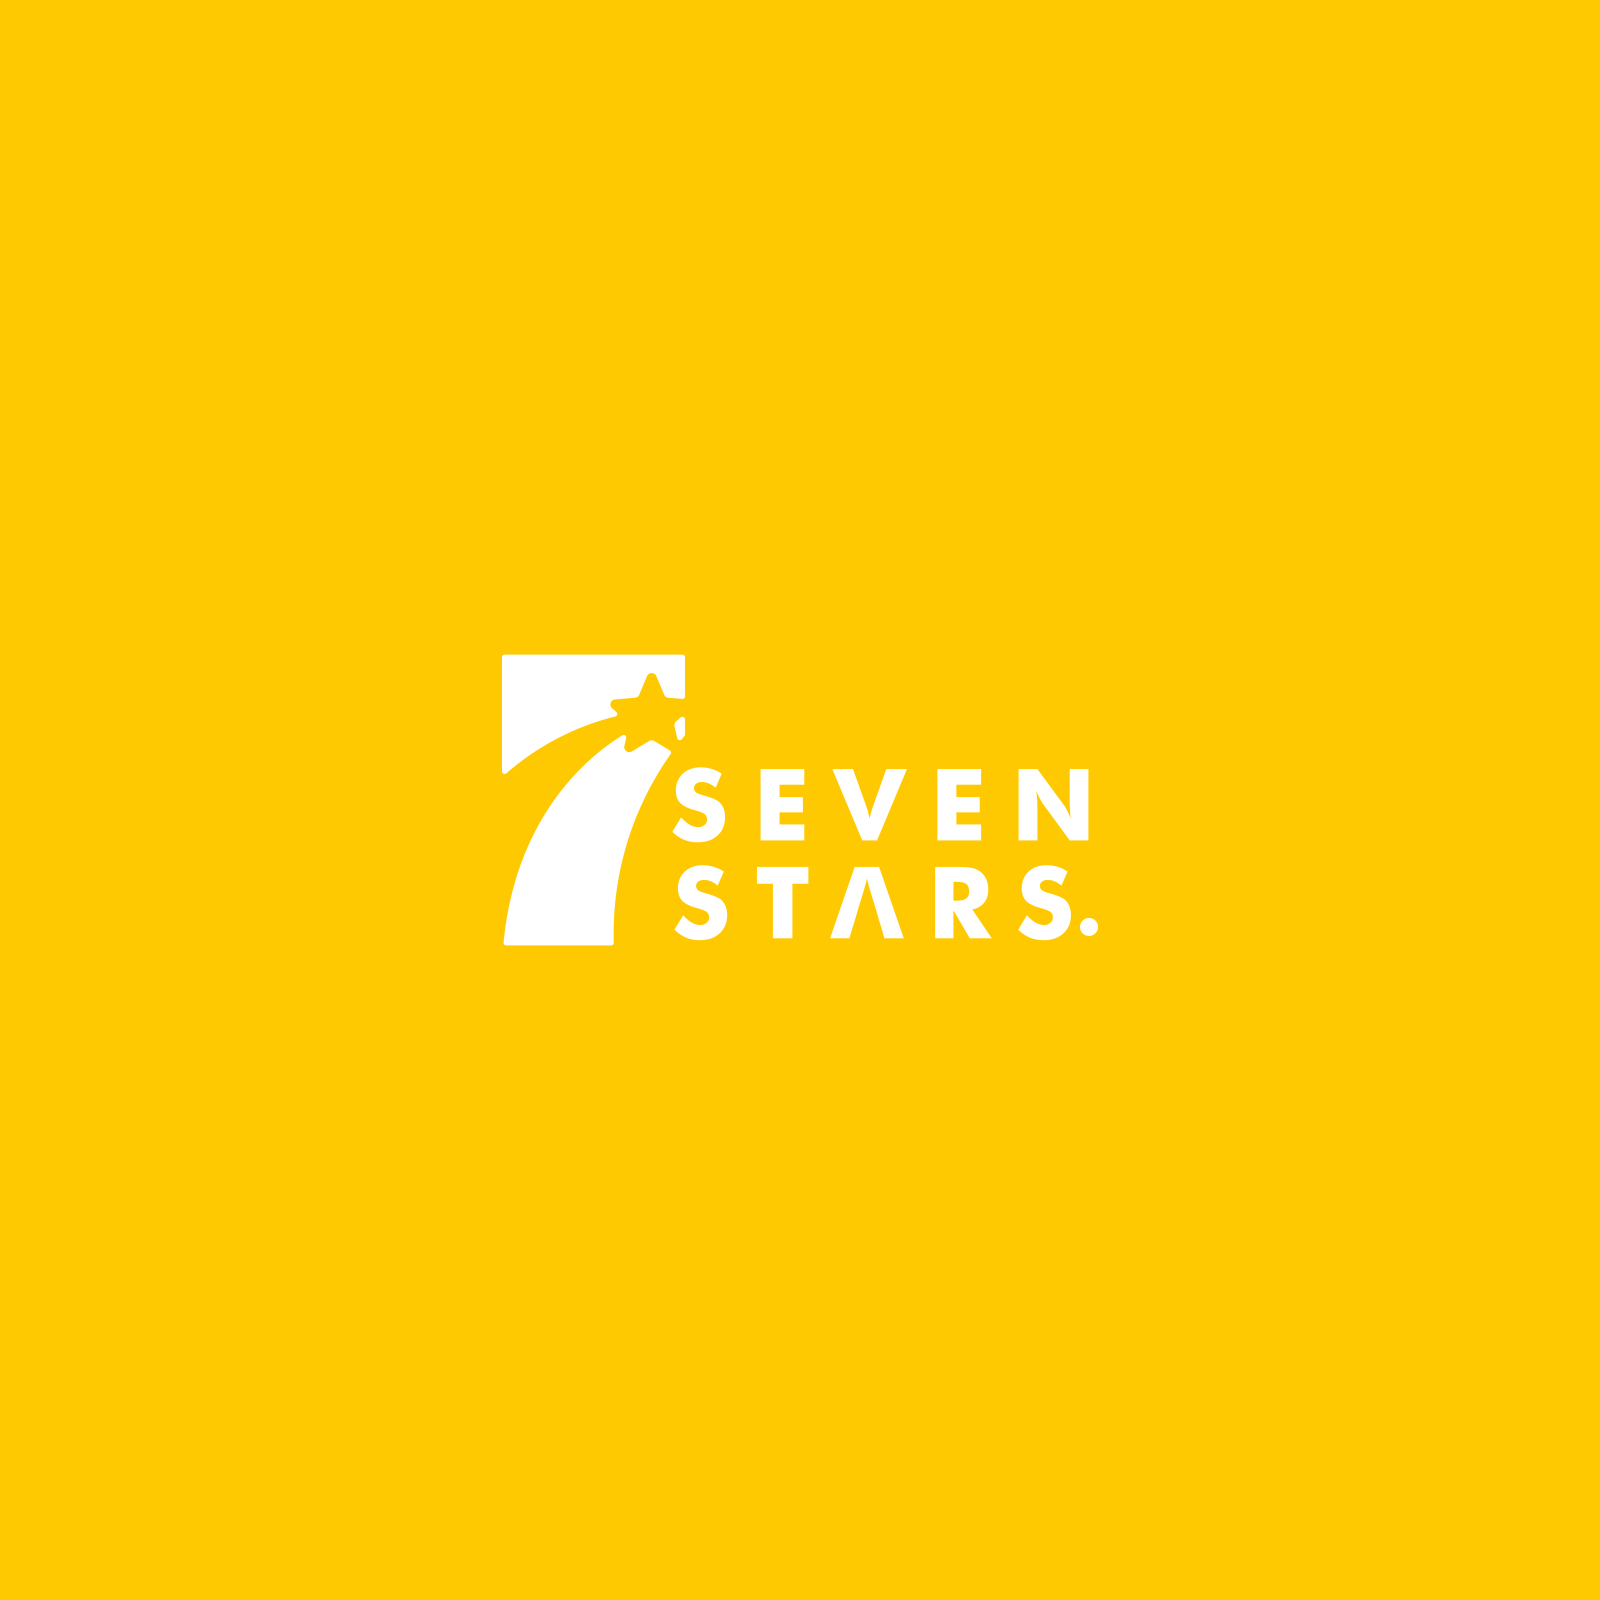 New logo wanted for seven stars hotel | Logo design contest | 99designs